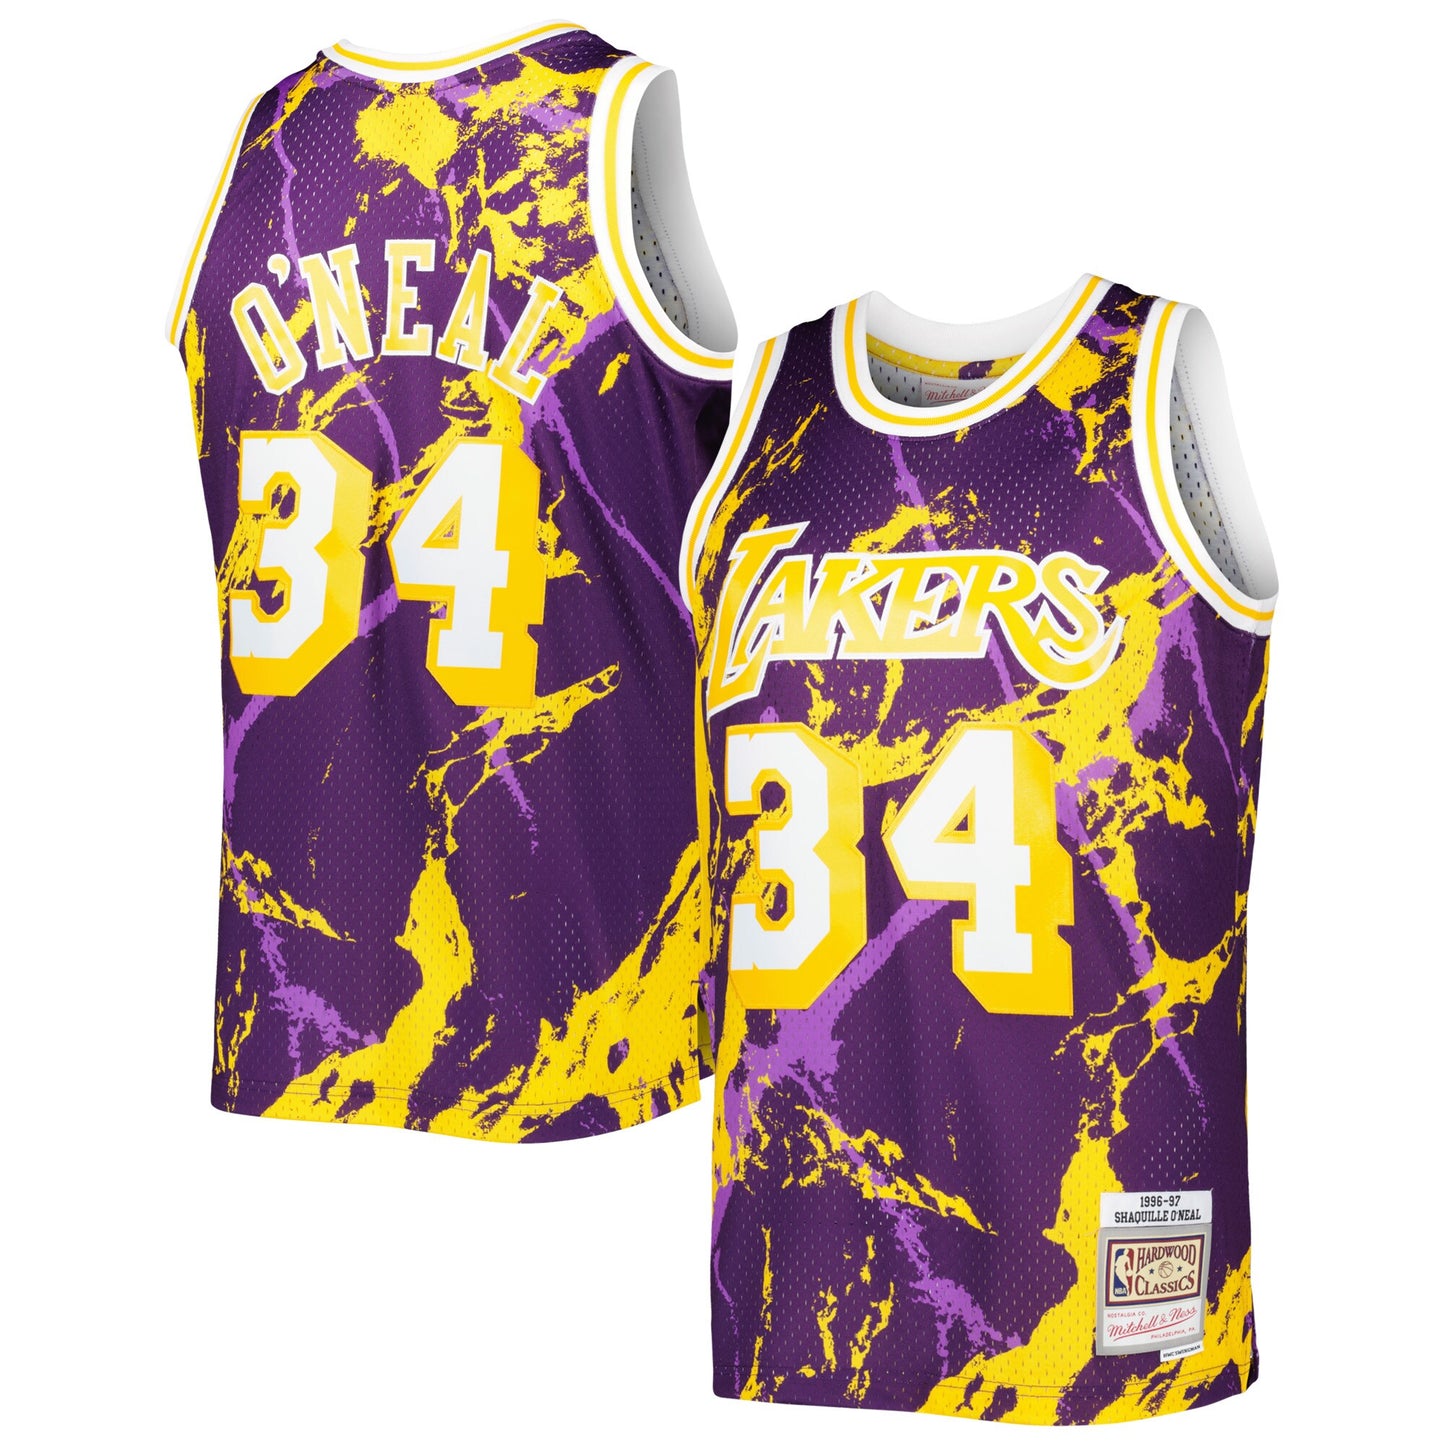 Shaquille O'Neal Los Angeles Lakers Mitchell & Ness 1996/97 Hardwood Classics Marble Swingman Jersey - Purple